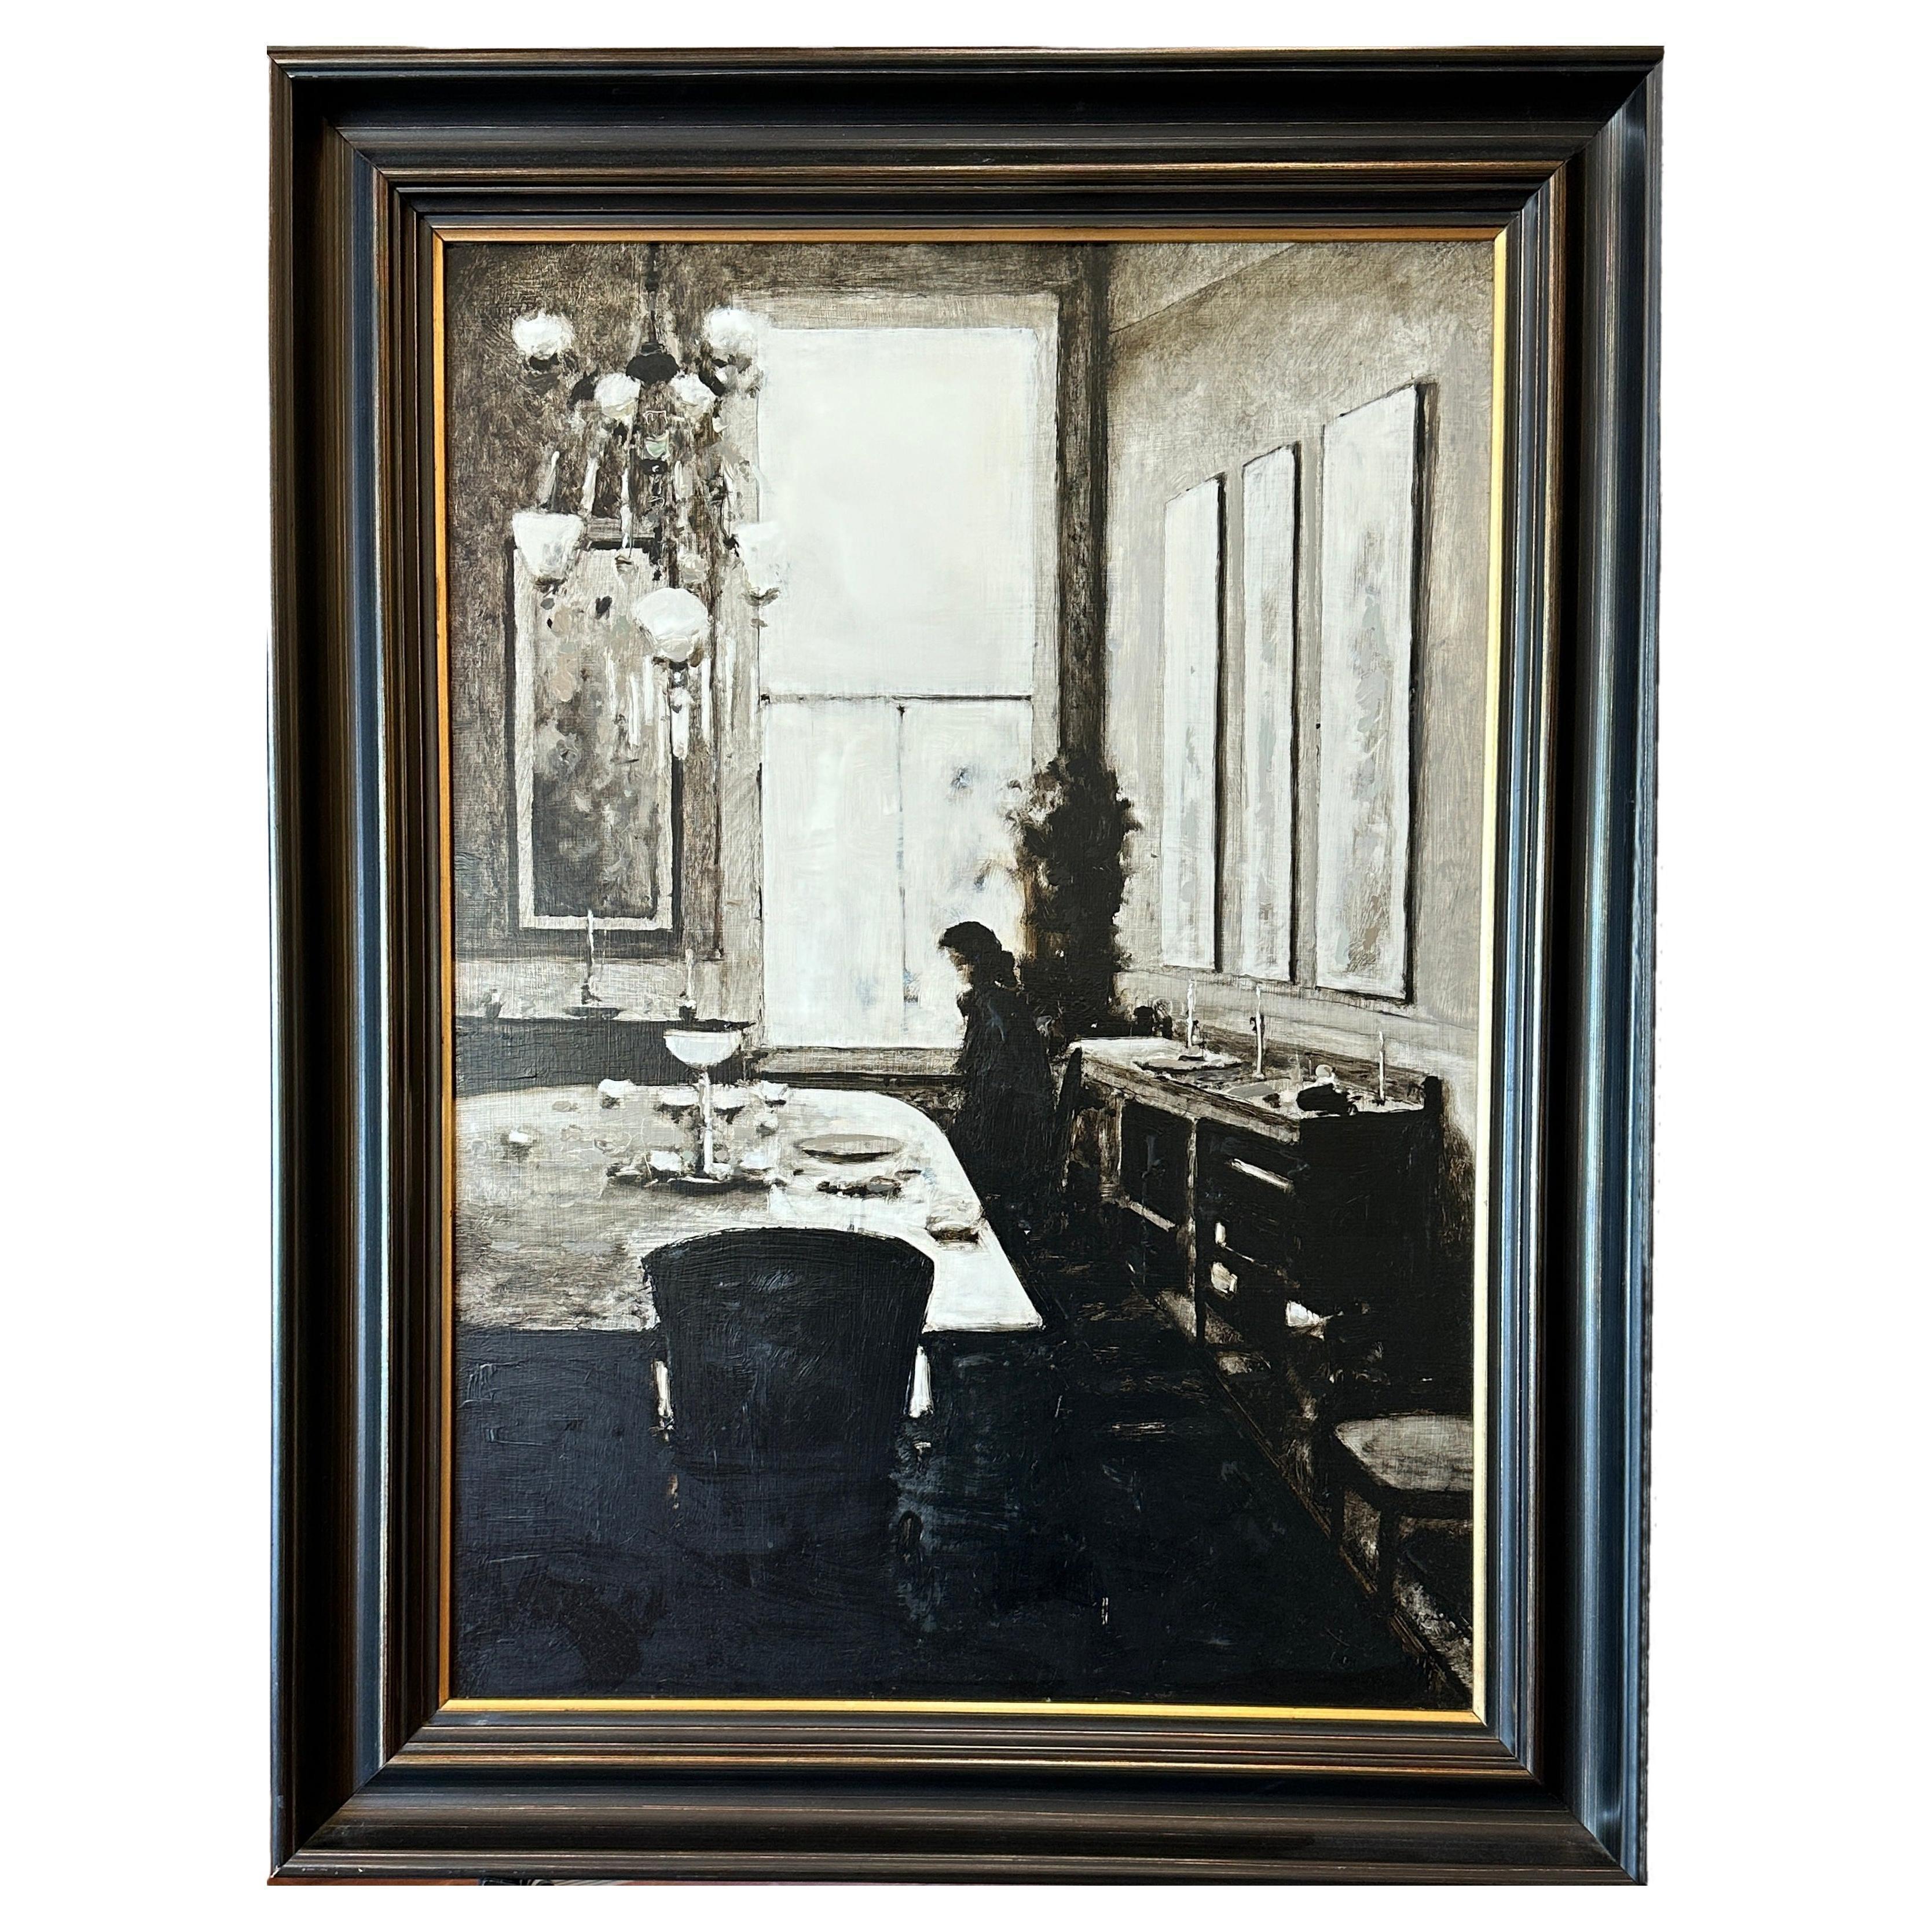 Sepia tones permeate this remarkable oil painting by American artist Geoffrey Johnson, who captures a hauntingly timeless scene. A woman waits by the window of her home, silent, almost absorbed in the diffuse ambiance of the room?

The artist